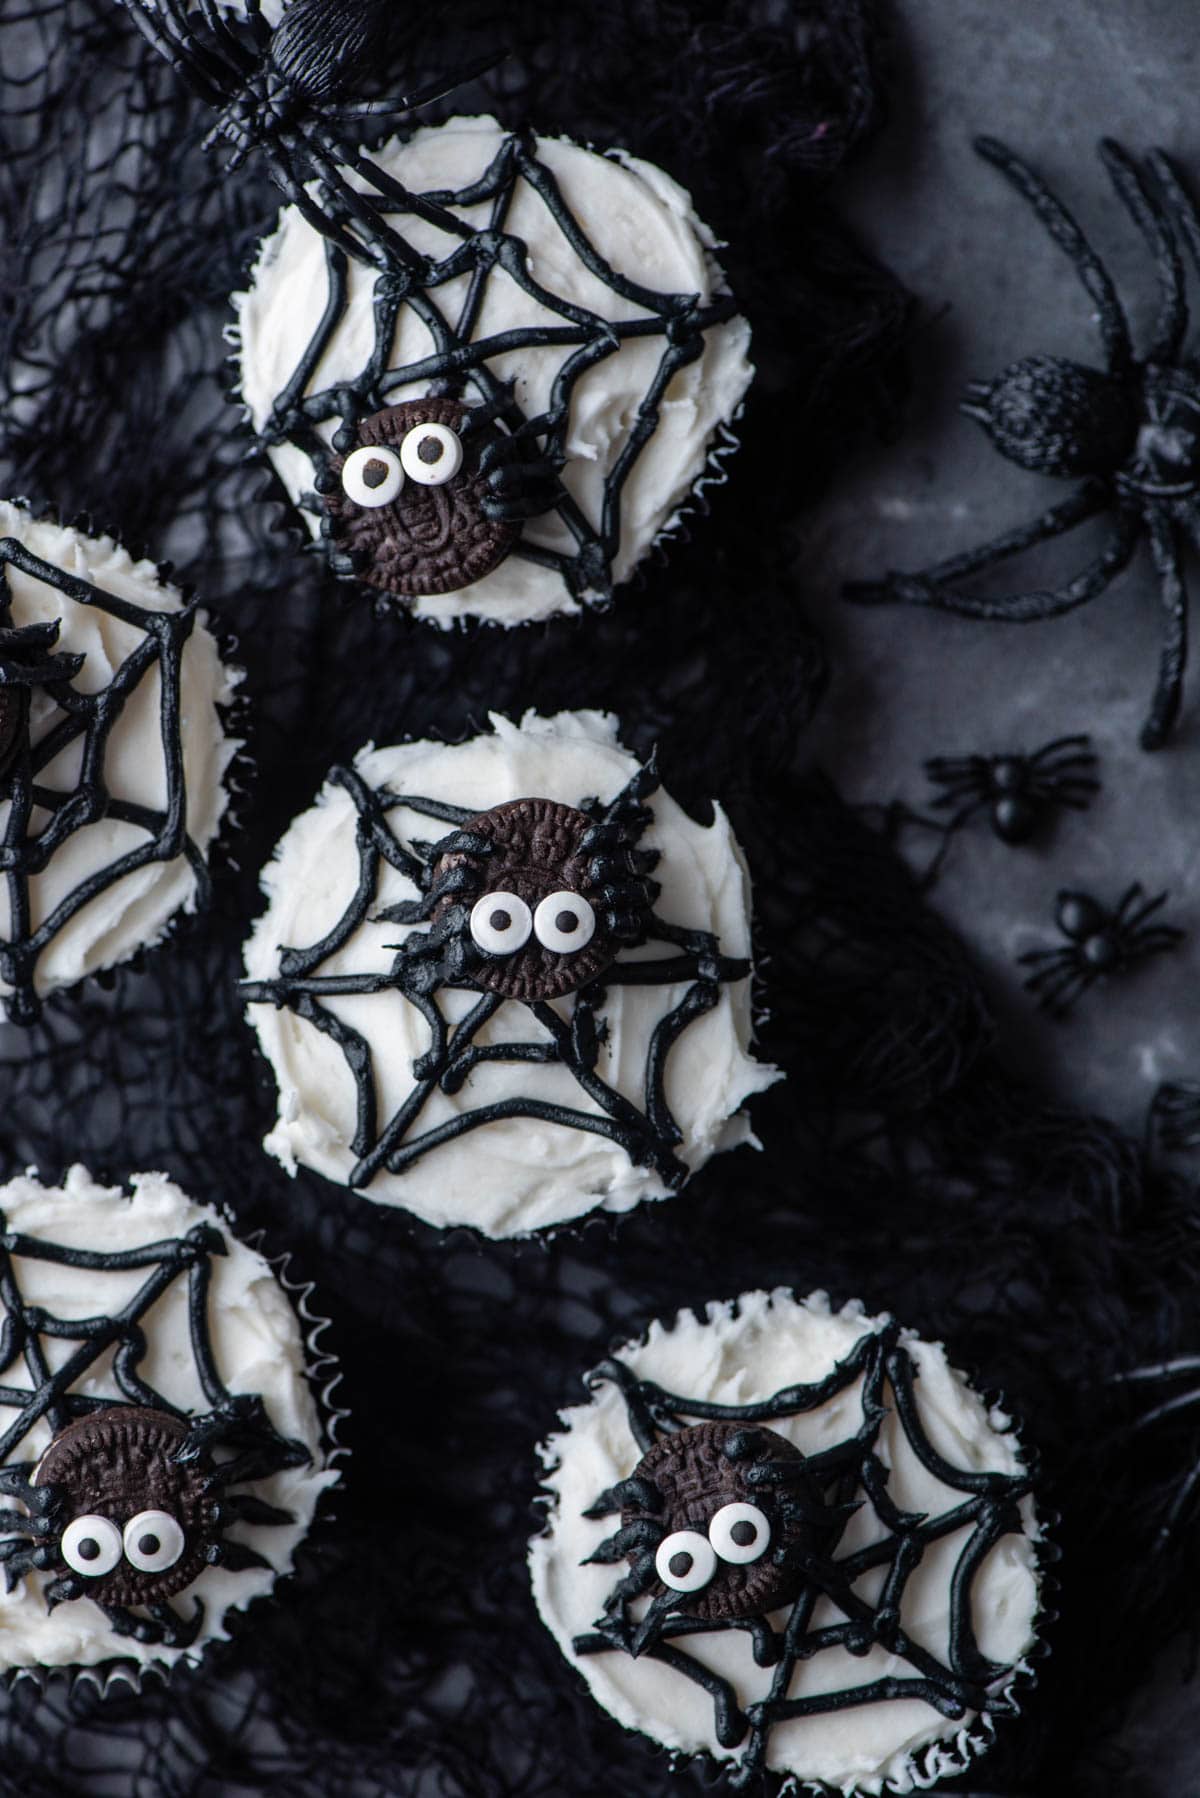 spider web cupcakes arranged on top of a black netting with mini plastic black spiders around them